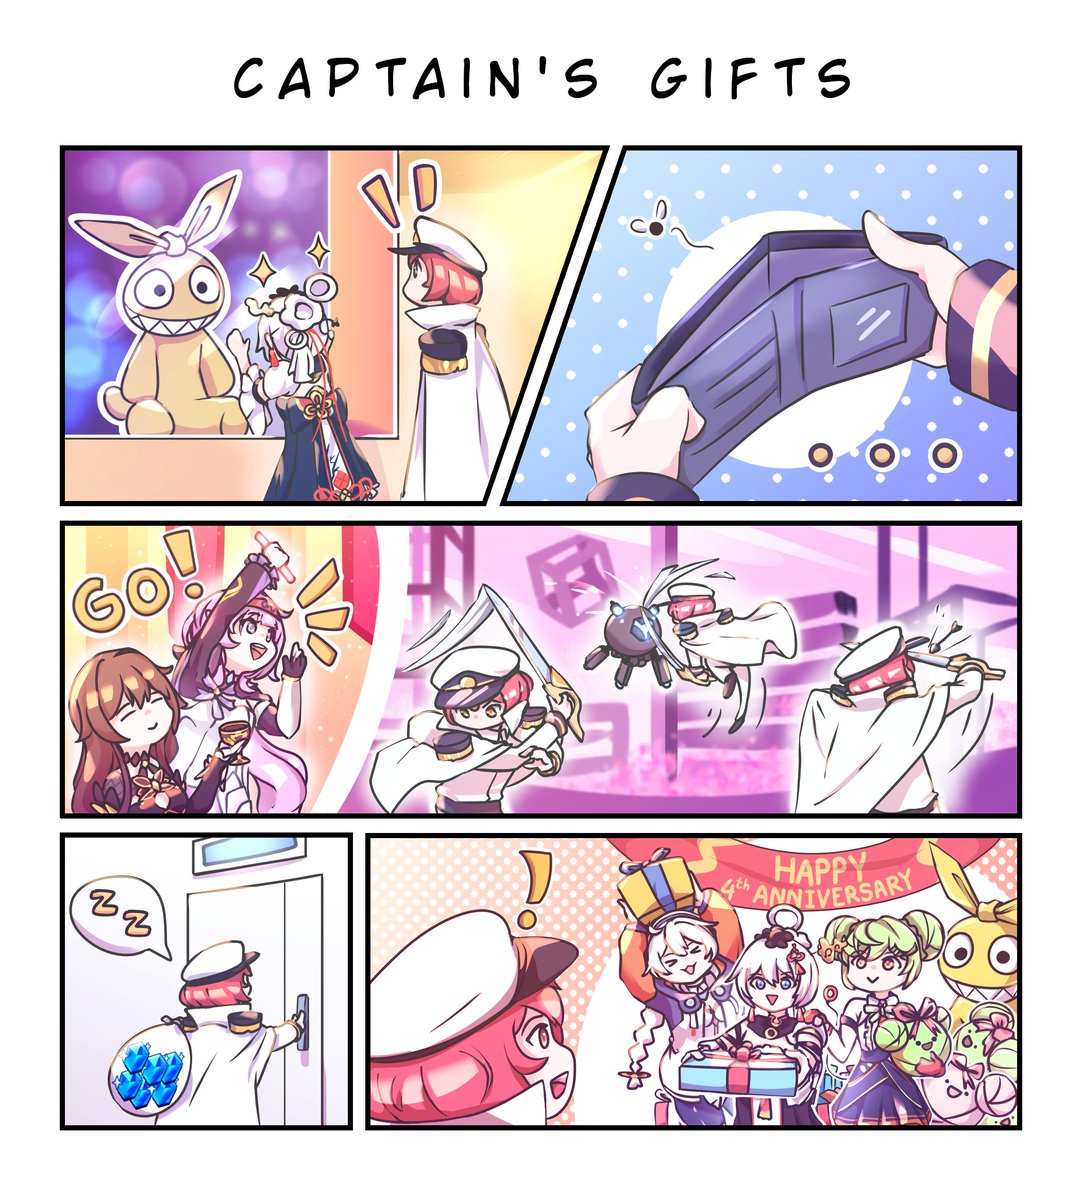 Valkyries' Anniversary Trip: Shopping
 
Captains' company is our greatest gift!
Your company is Captains' greatest gift!
 
 Kudos to Captain @thatwasjack01 for the amazing fan art!
 
 #GLB4thAnni
 #BeckoningHorizon
 #HonkaiImpact3rd 